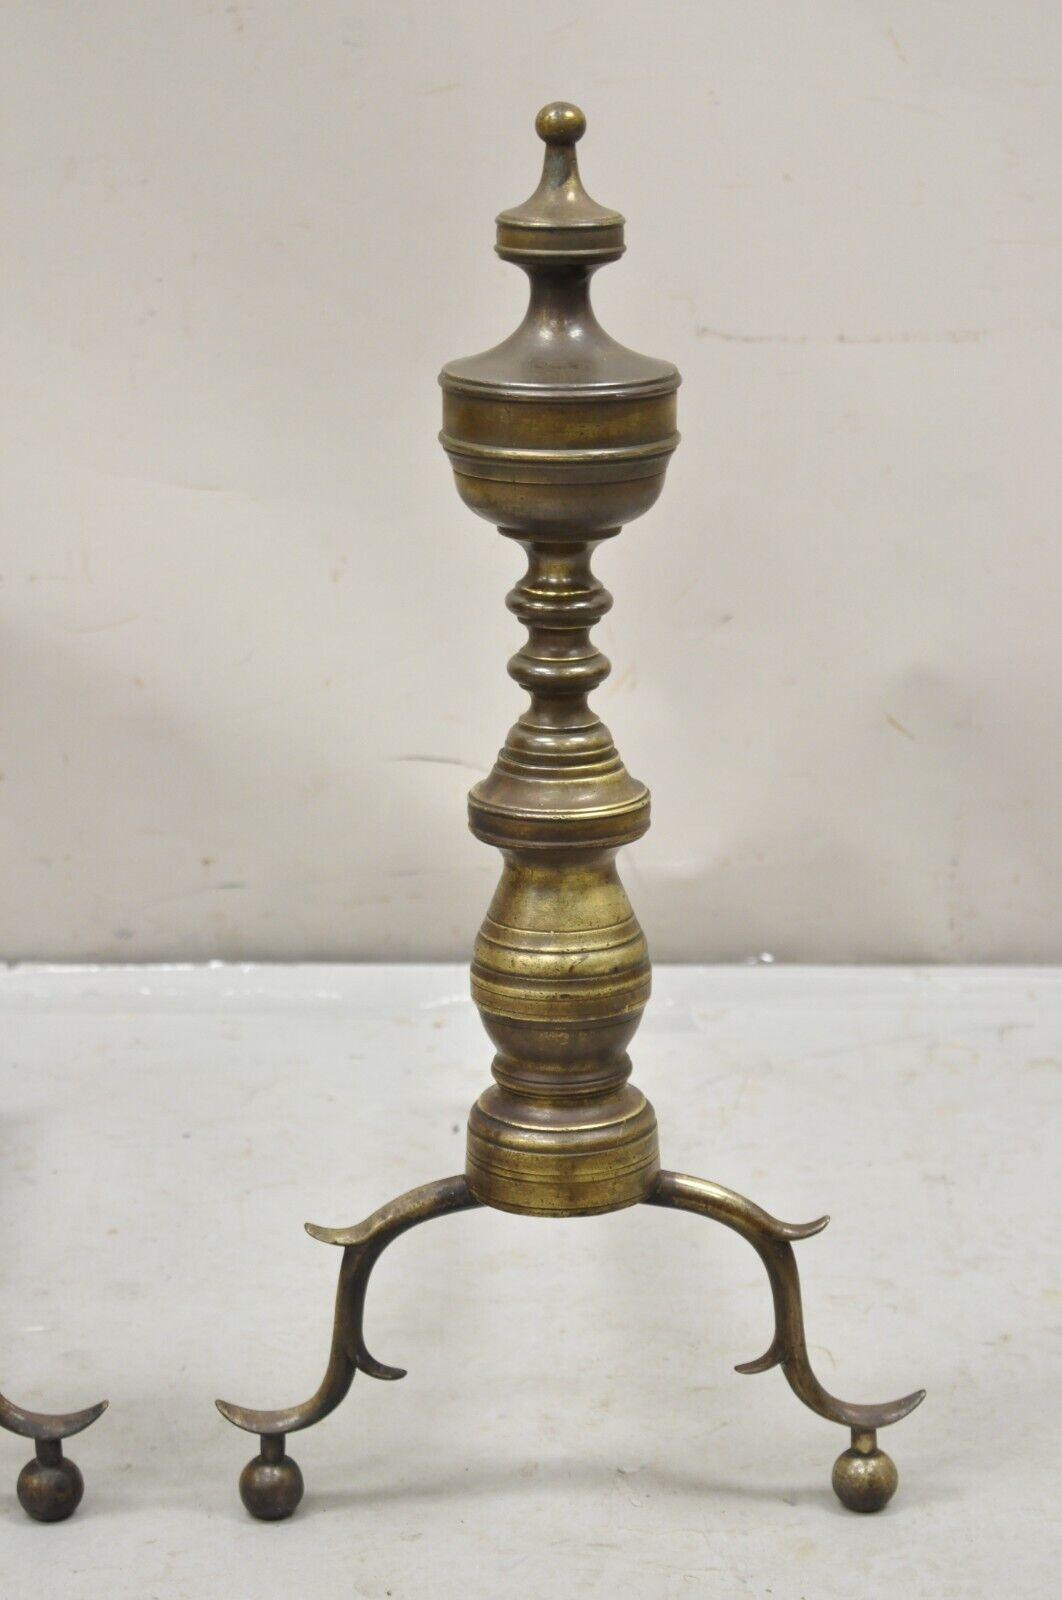 19th Century Antique Brass Federal Branch Leg Urn Finial Cast Iron Andirons - a Pair For Sale